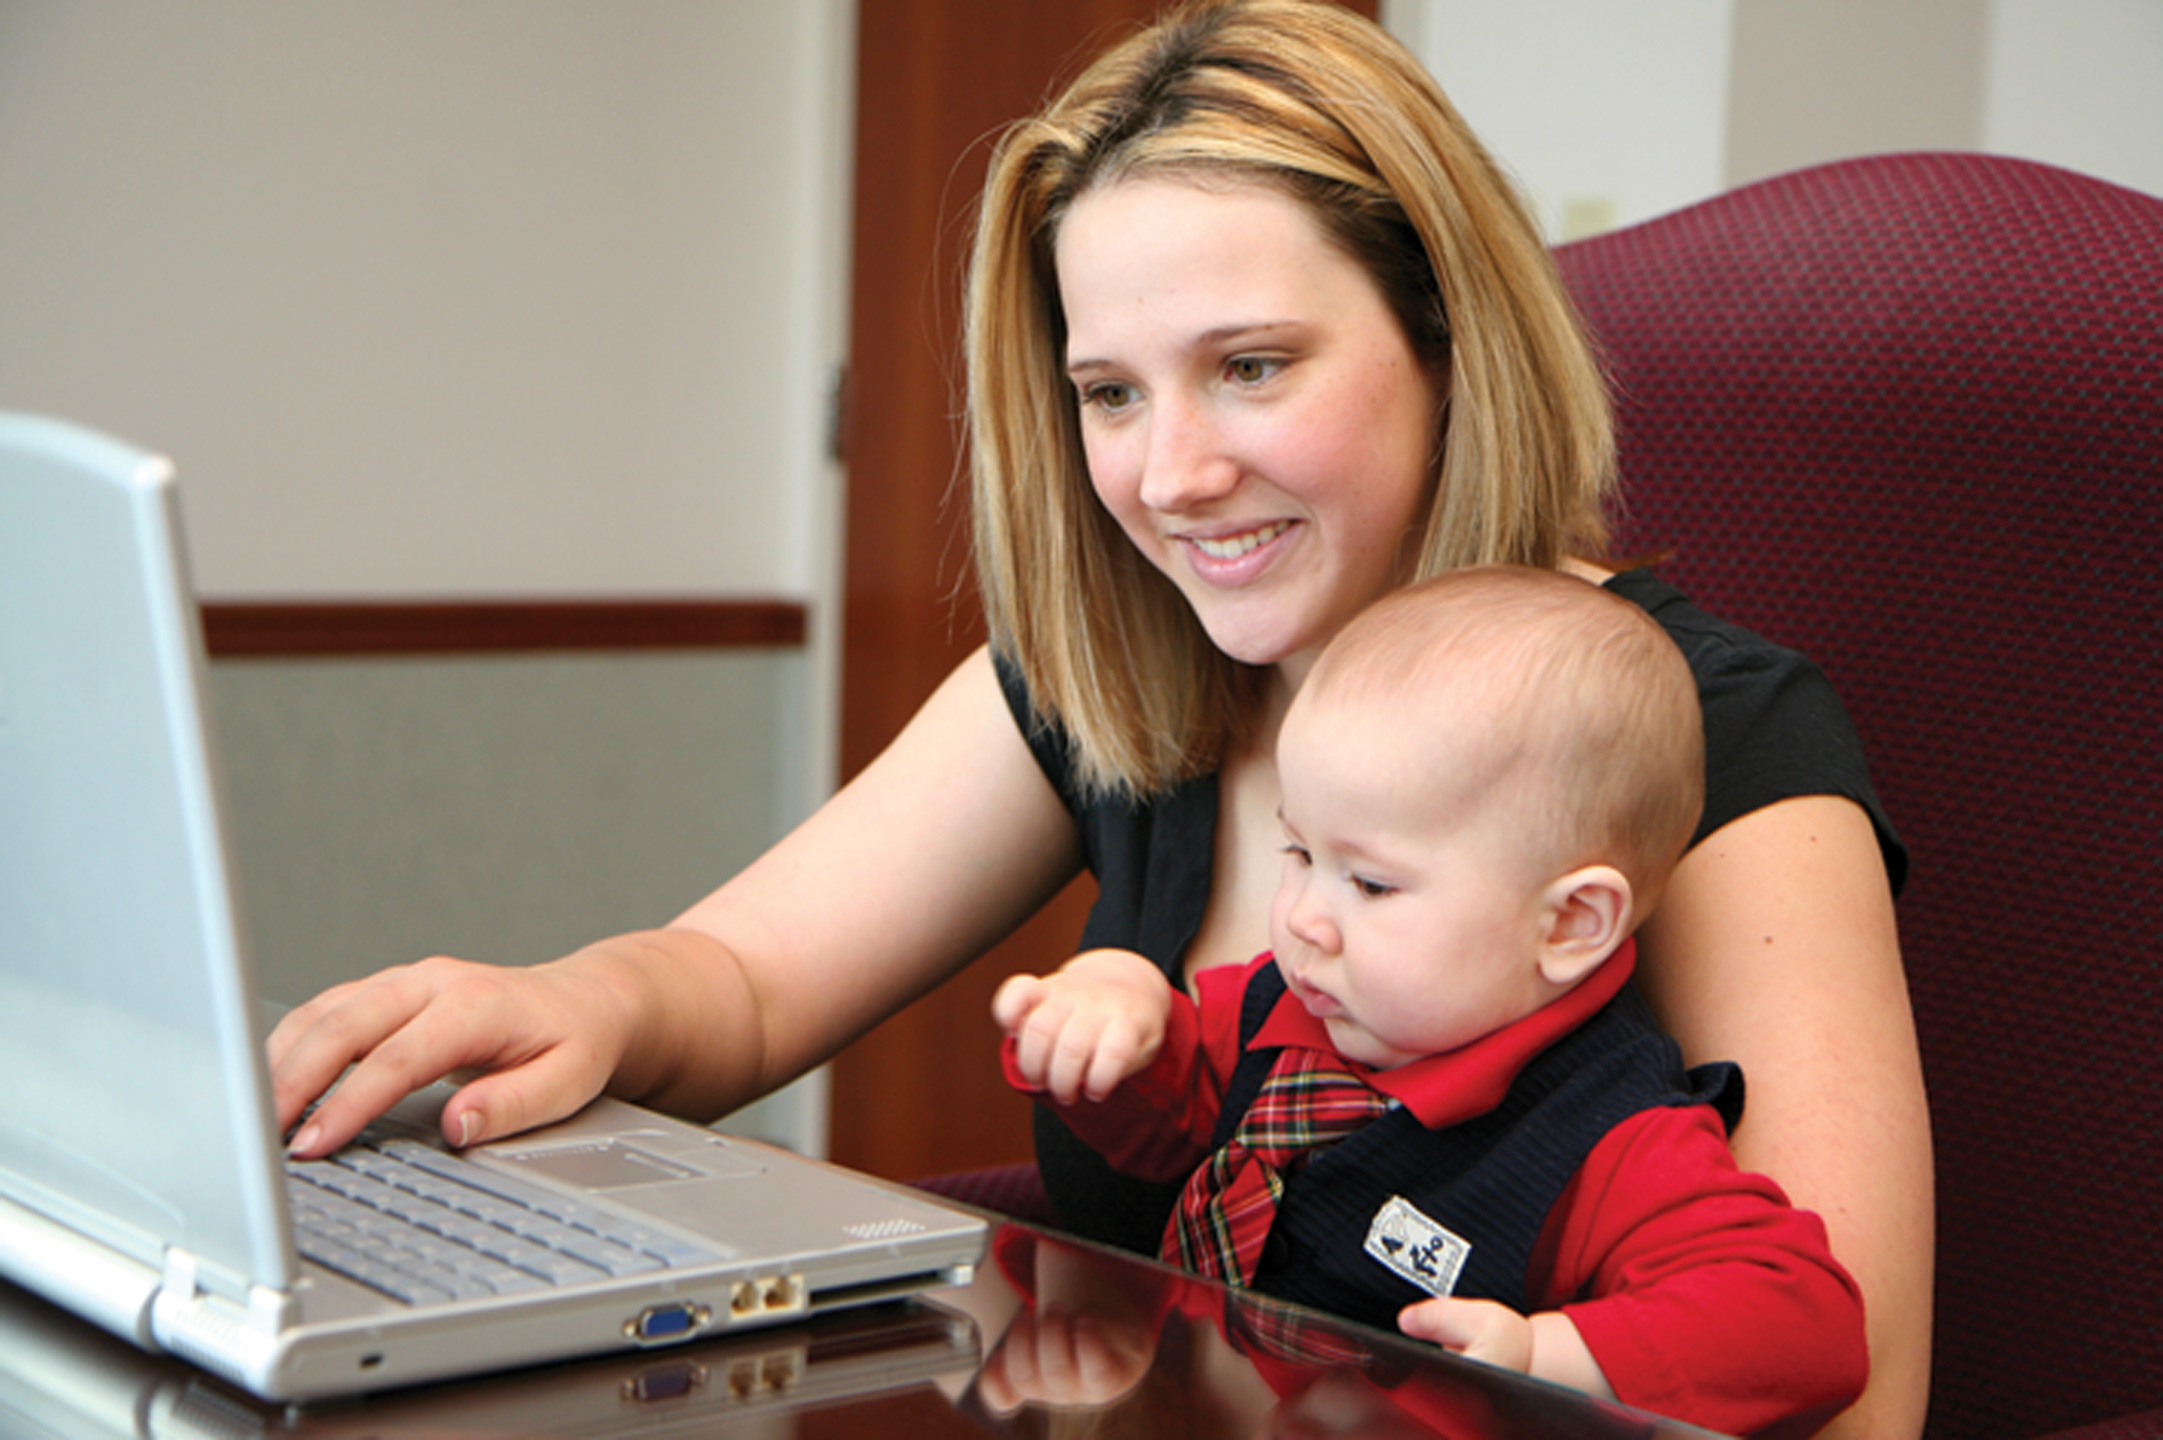 mother-on-laptop-with-baby1440